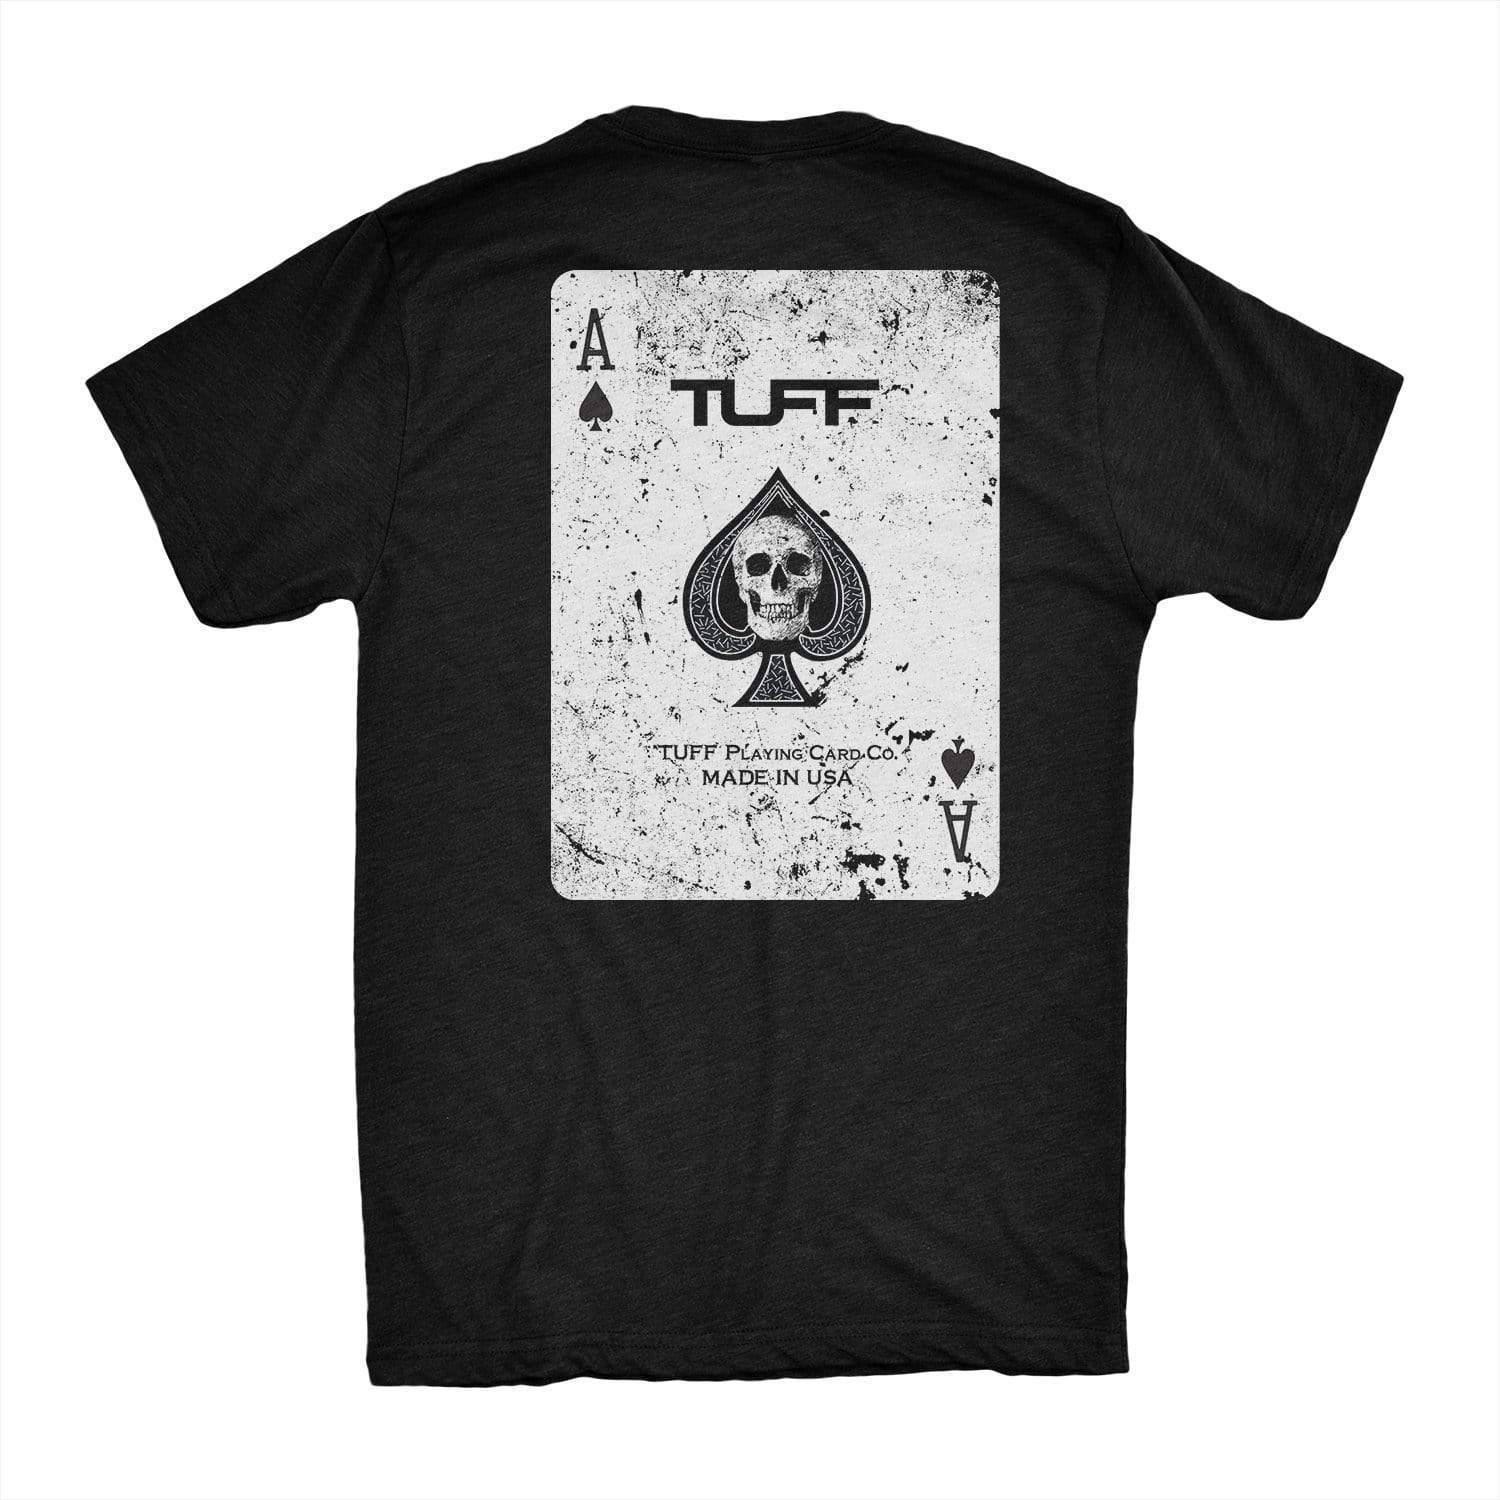 Aces of TUFF Tee T-shirt